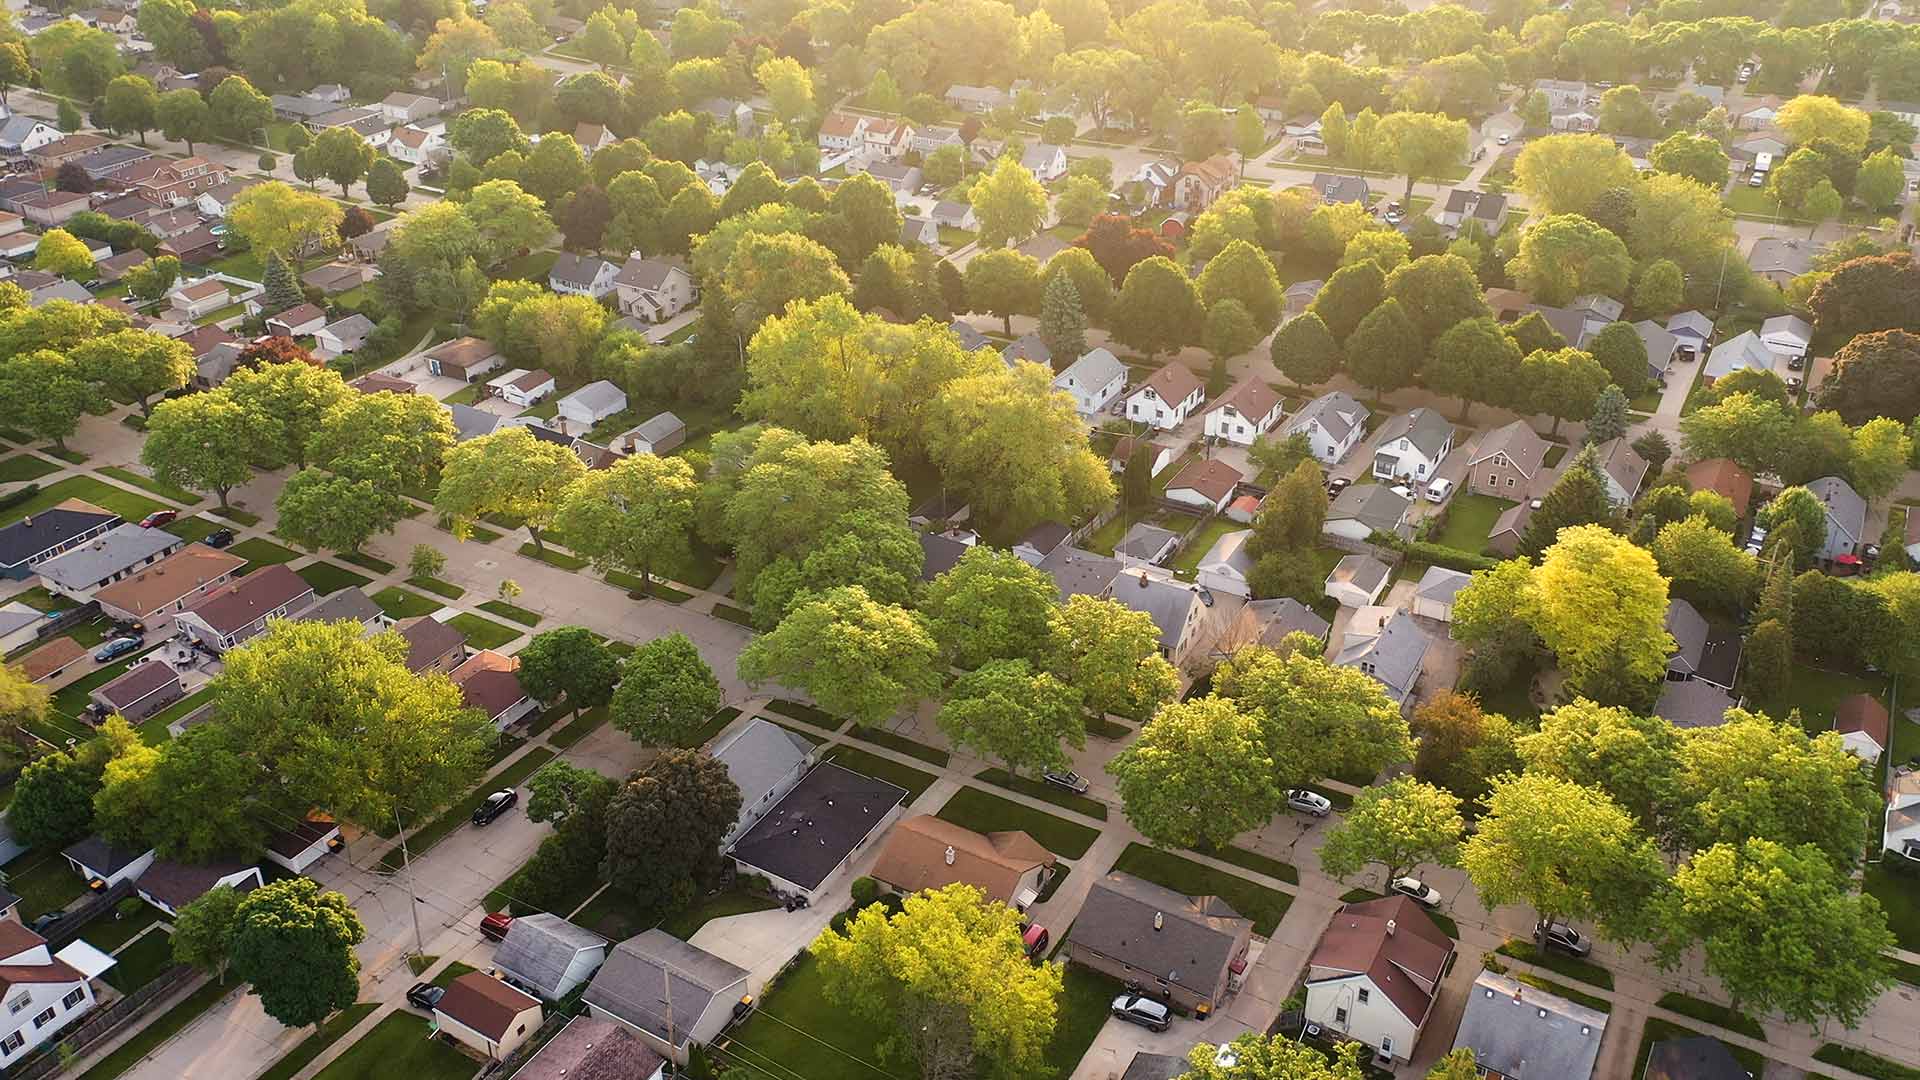 Aerial view of a neighborhood in Janesville, MN.